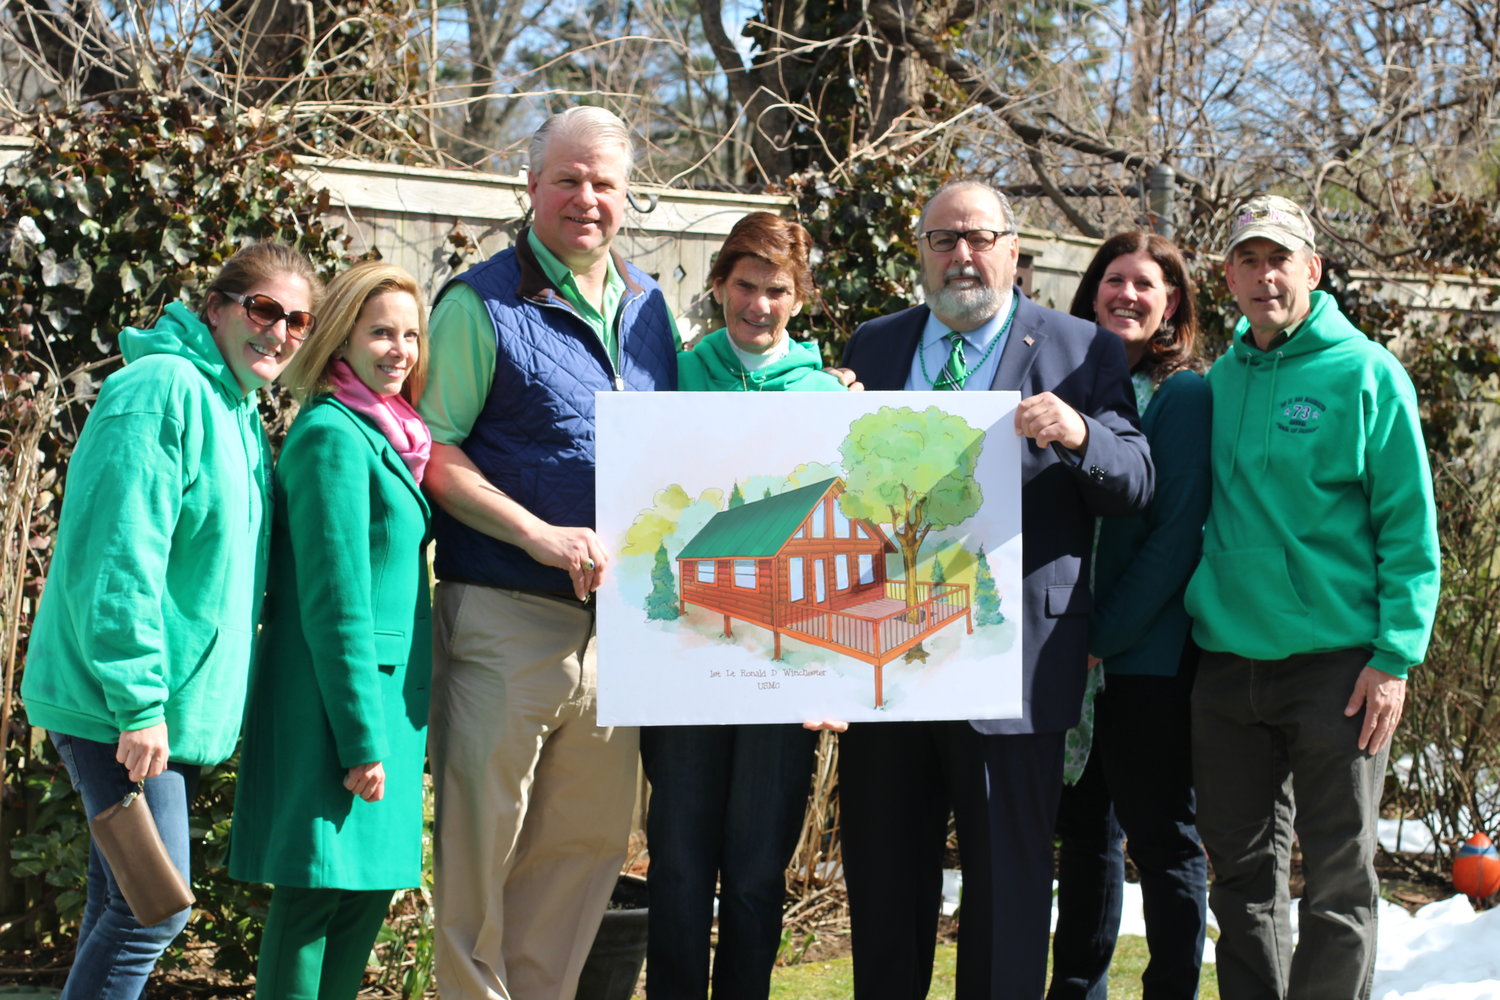 Kristine Winchester, far left, joined Town of Hempstead Supervisor Laura Gillen, Brian Rathjen, Marianna Winchester, Mayor Francis X. Murray, Deputy Mayor Kathleen Baxley and Michael Quilty at last year’s St. Patrick’s Parade. Winchester was presented with the rendering of a treehouse to be dedicated to her late son, Ronald, a Marine killed in Iraq in 2004.